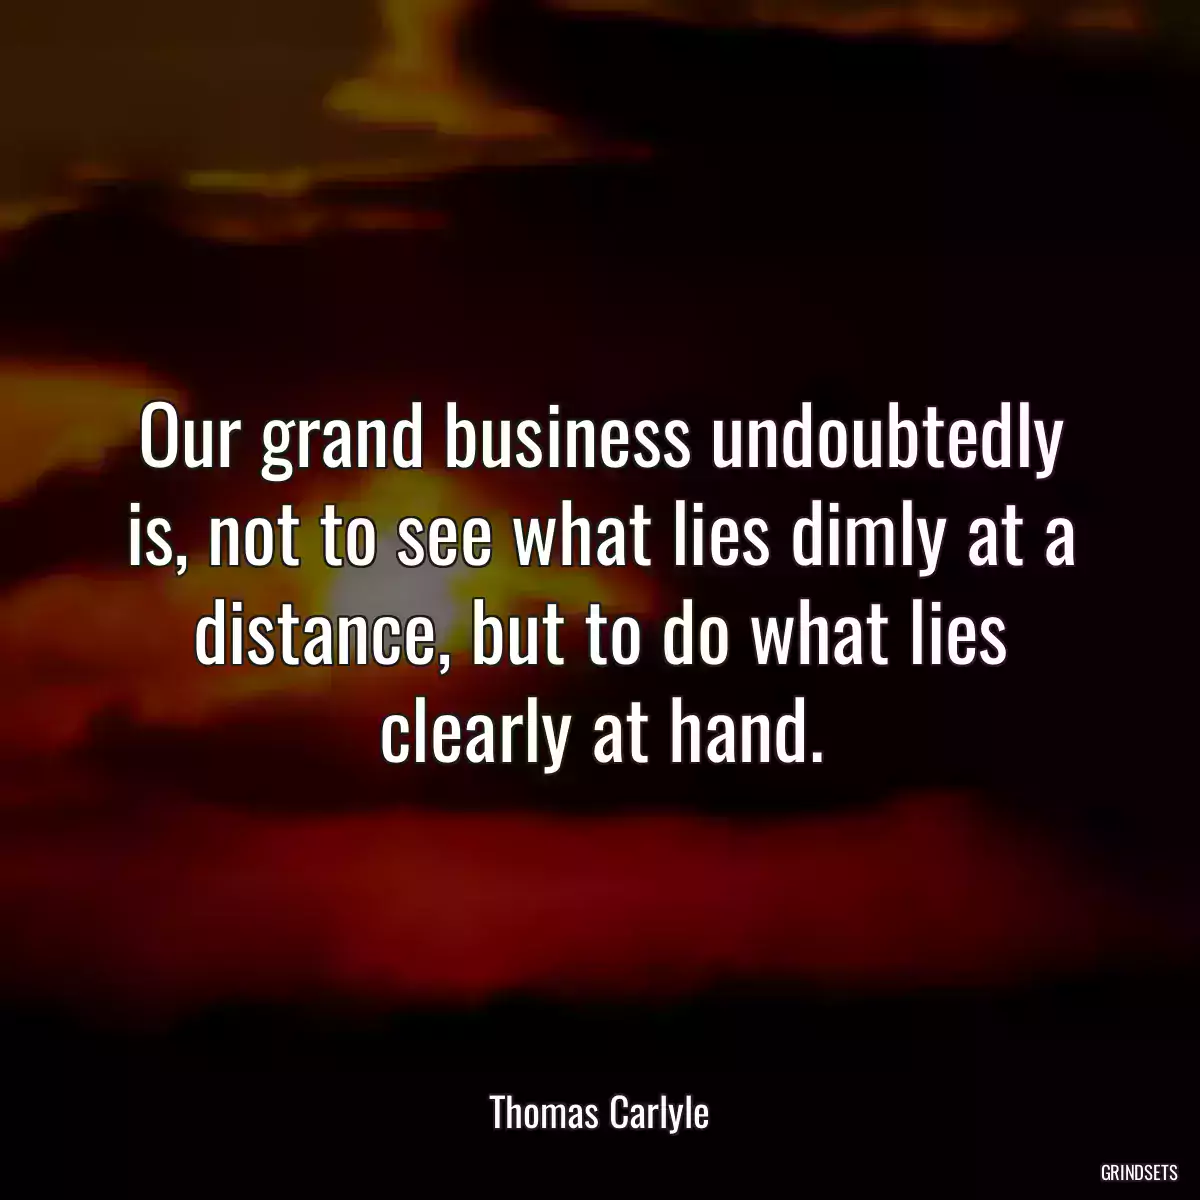 Our grand business undoubtedly is, not to see what lies dimly at a distance, but to do what lies clearly at hand.